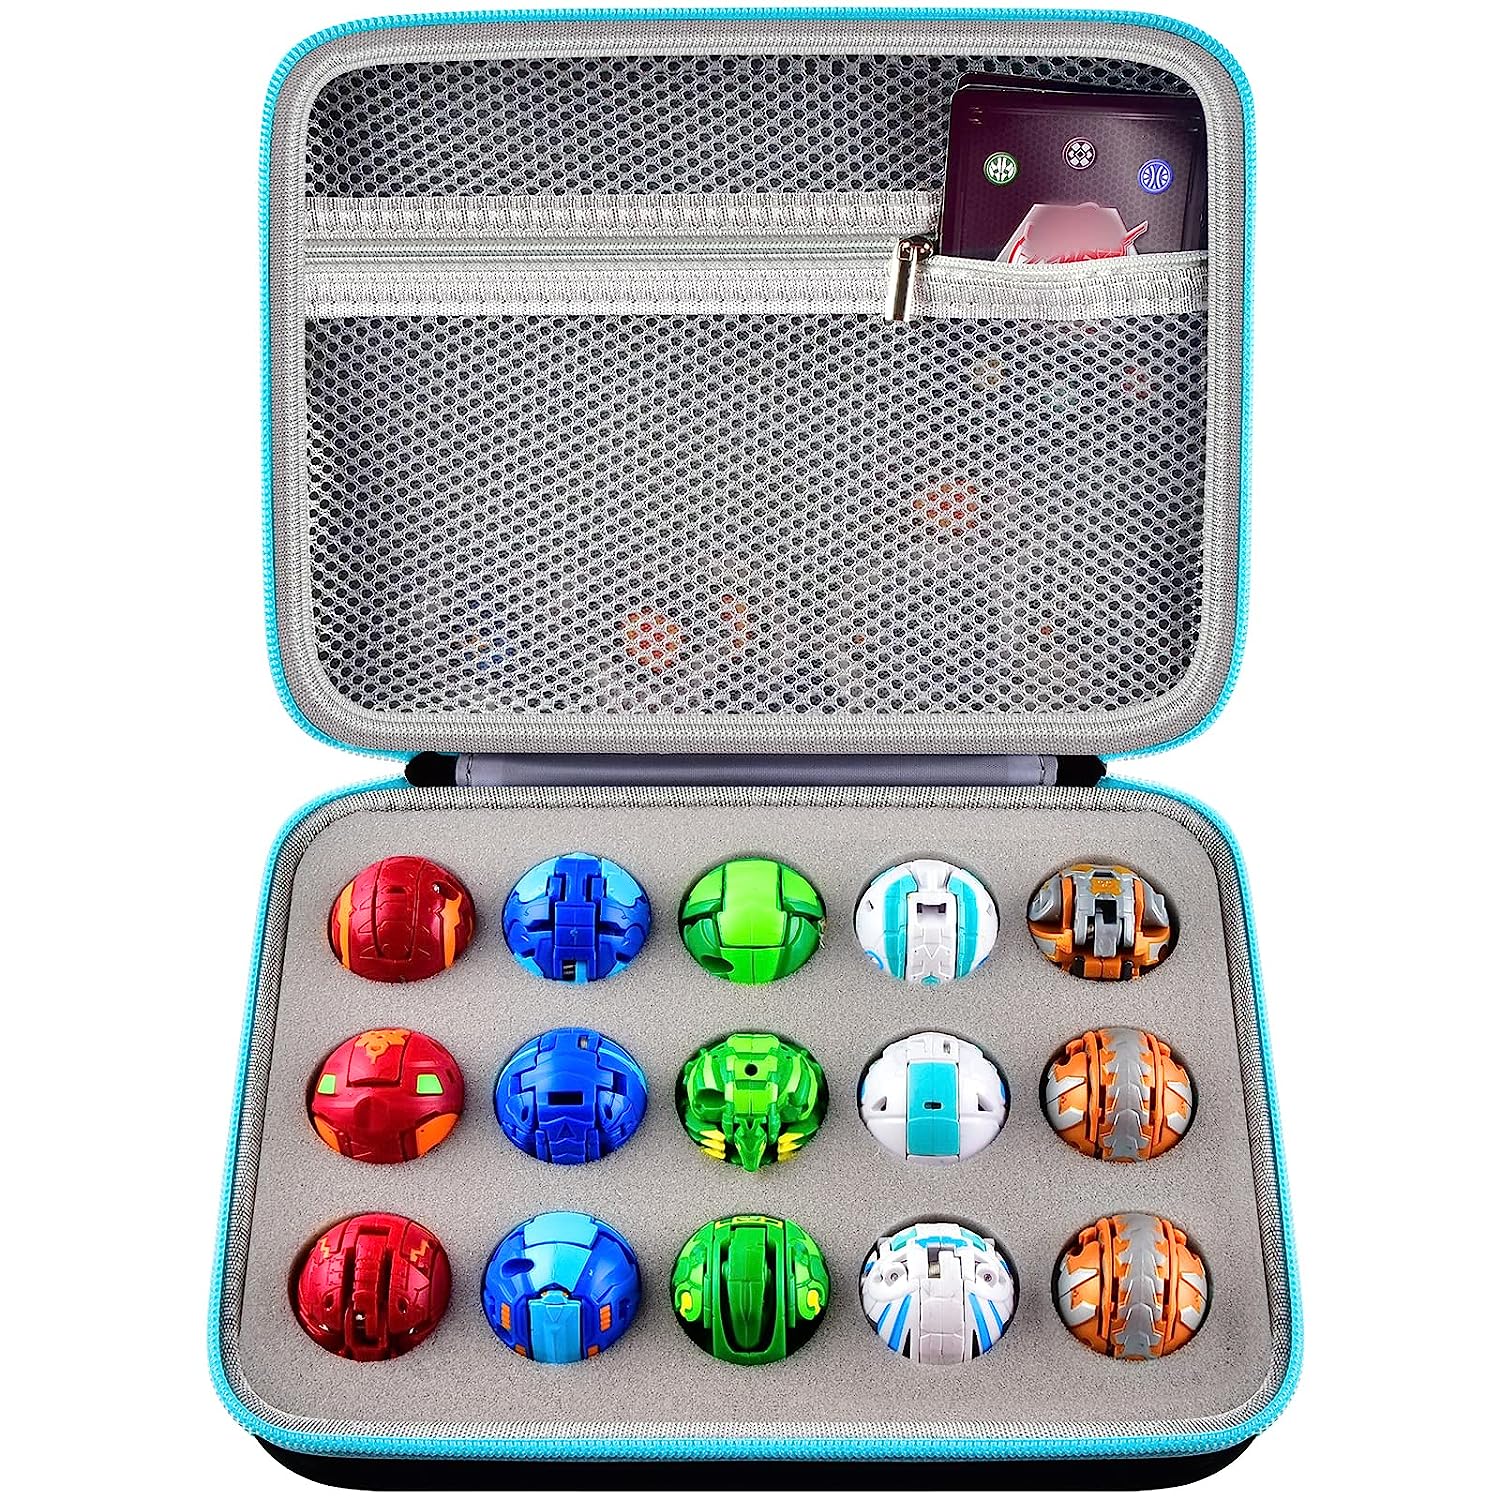 Pastele Bakugan Battle Brawlers Characters Custom Personalized Airpods Case  Shockproof Cover The Best Smart Protective Cover